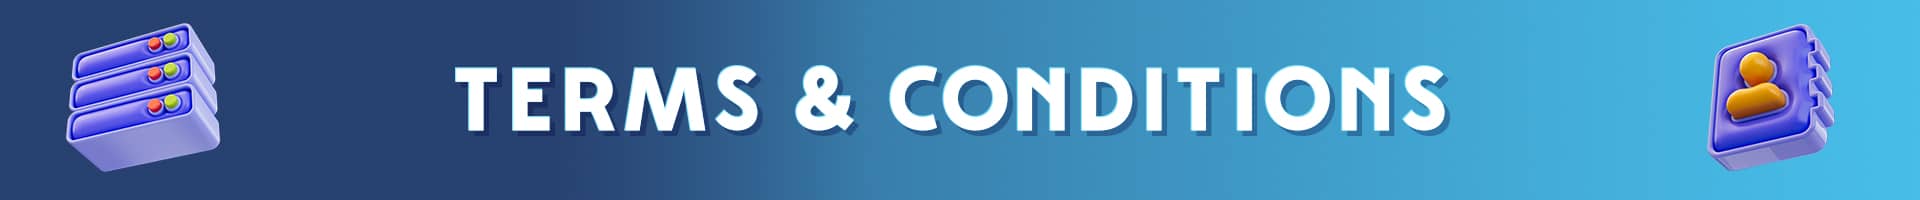 Terms and Conditions banner